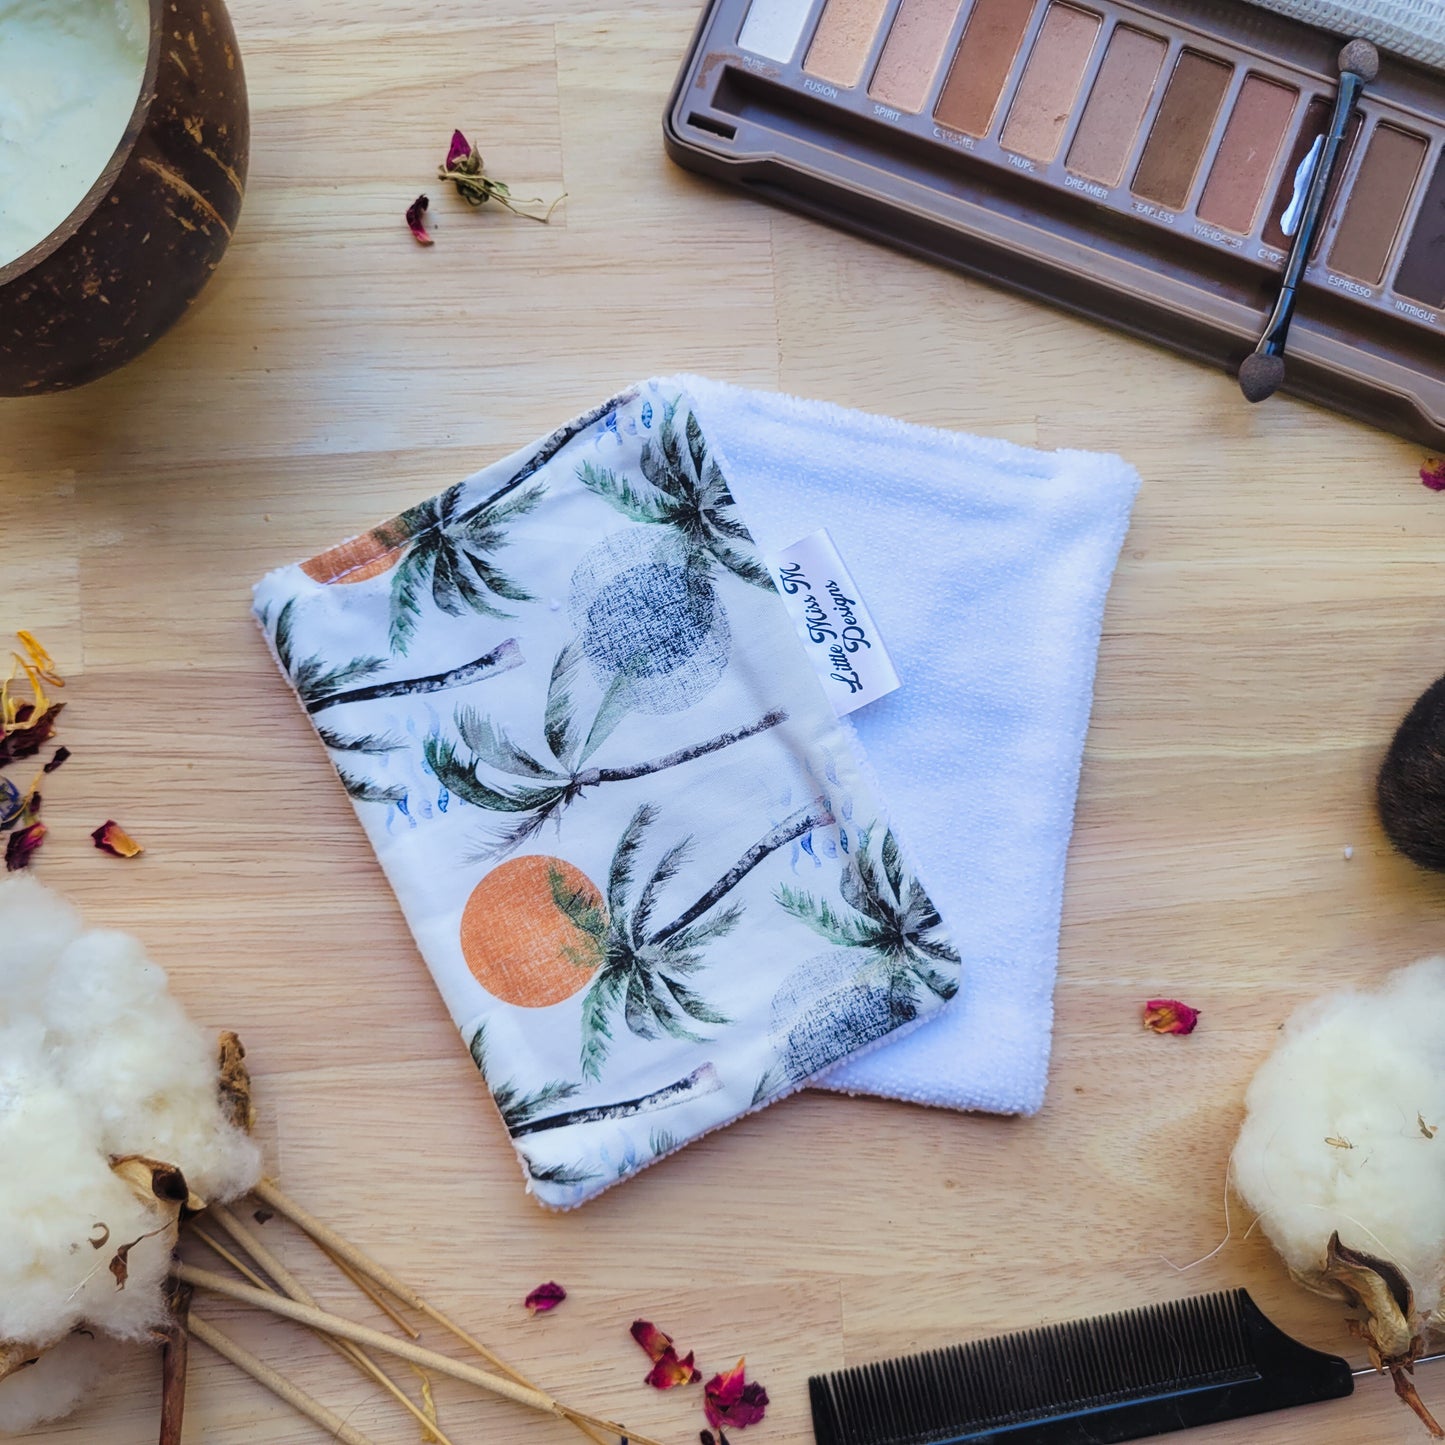 Palm Trees Makeup Wipes